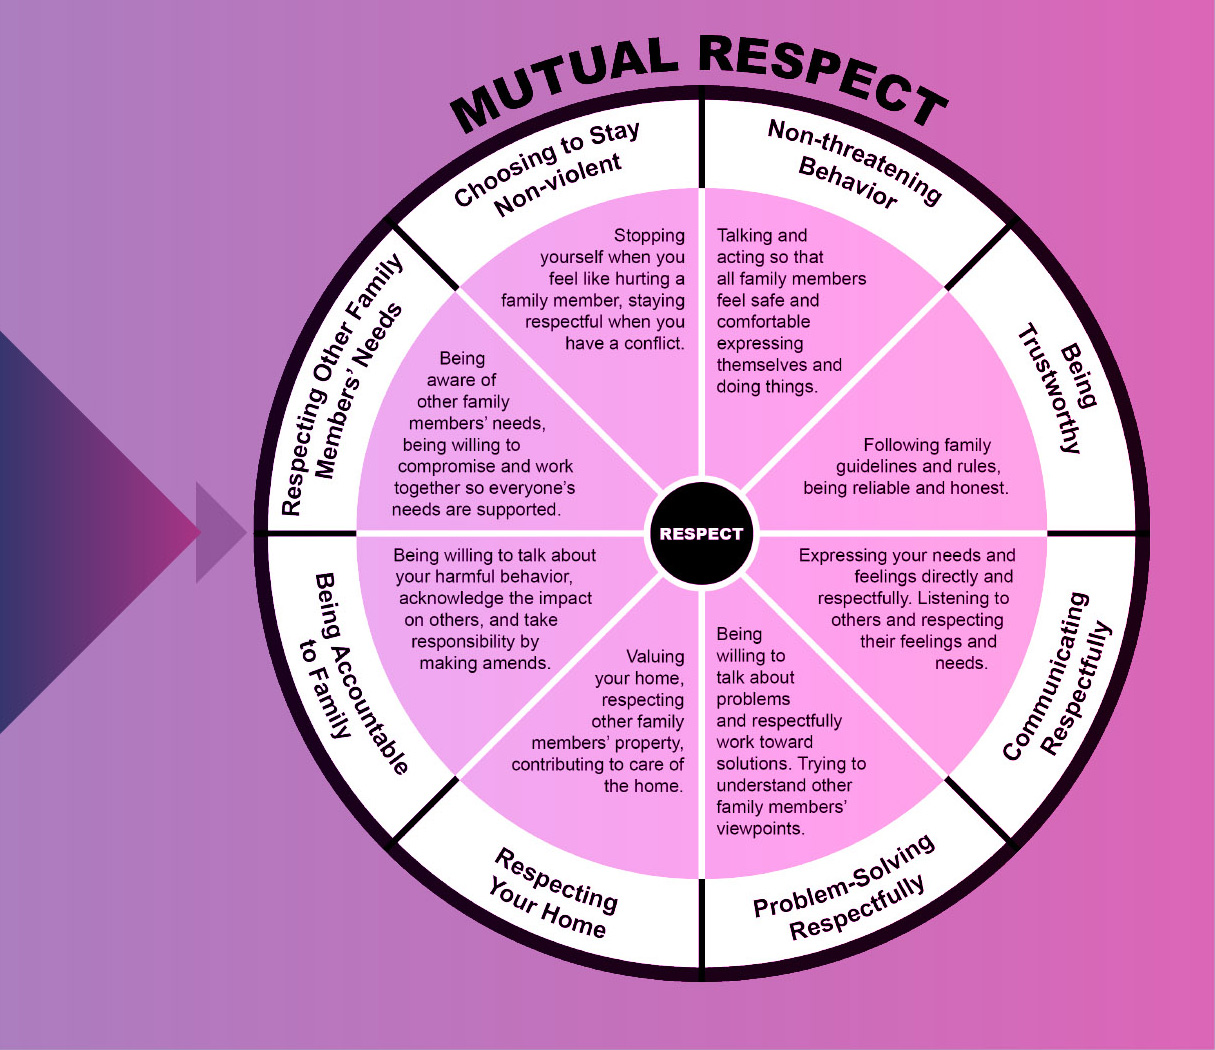 From Abuse To Respect_Mutual Respect